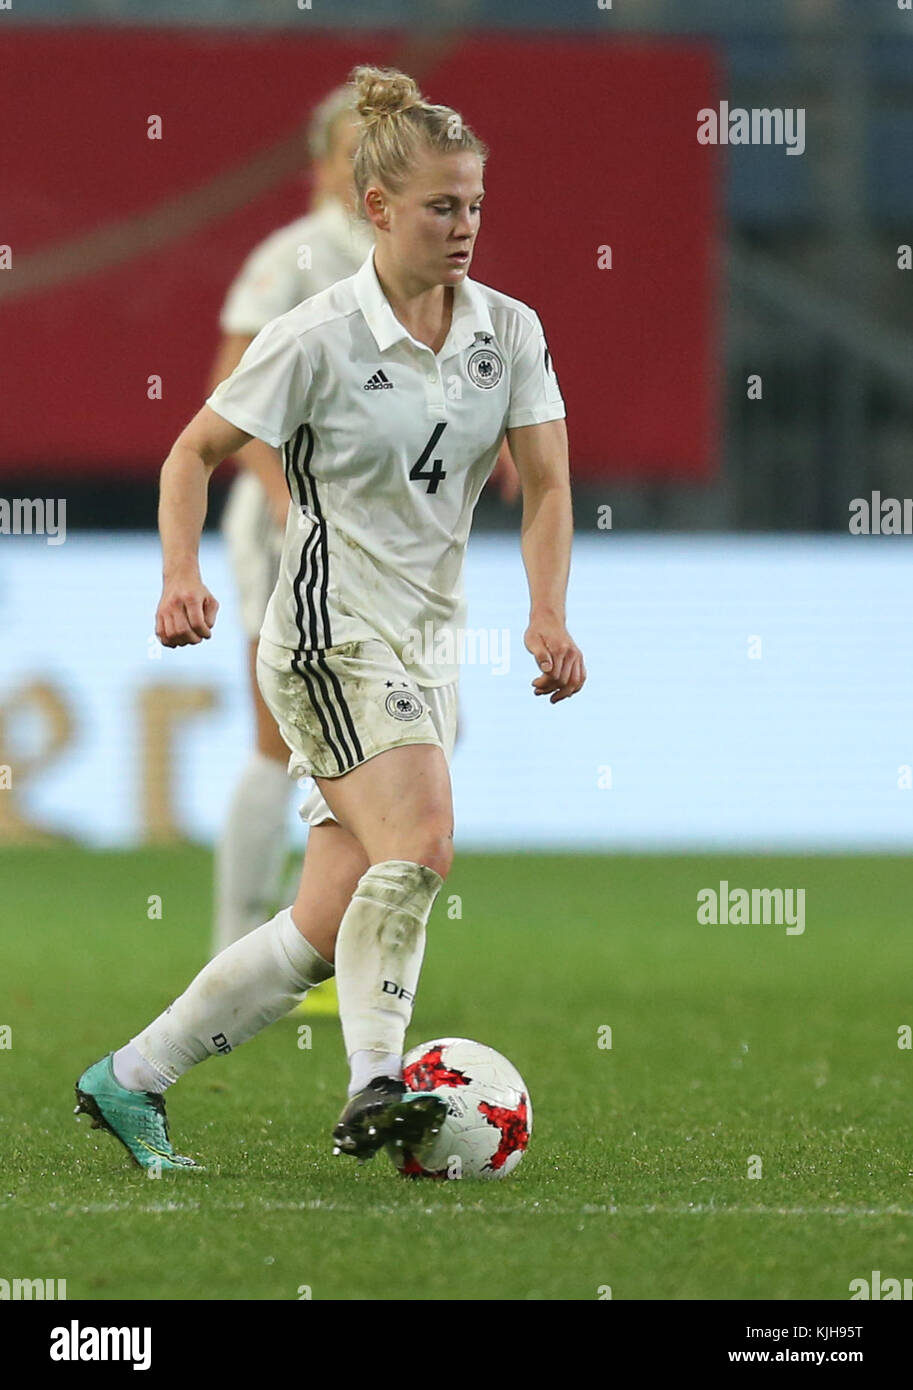 Bielefeld, Germany. 24th Nov, 2017. Germany's Leonie Maier in action during the women's international friendly soccer match between Germany and France in the Schueco Arena stadium in Bielefeld, Germany, 24 November 2017. Credit: Friso Gentsch/dpa/Alamy Live News Stock Photo